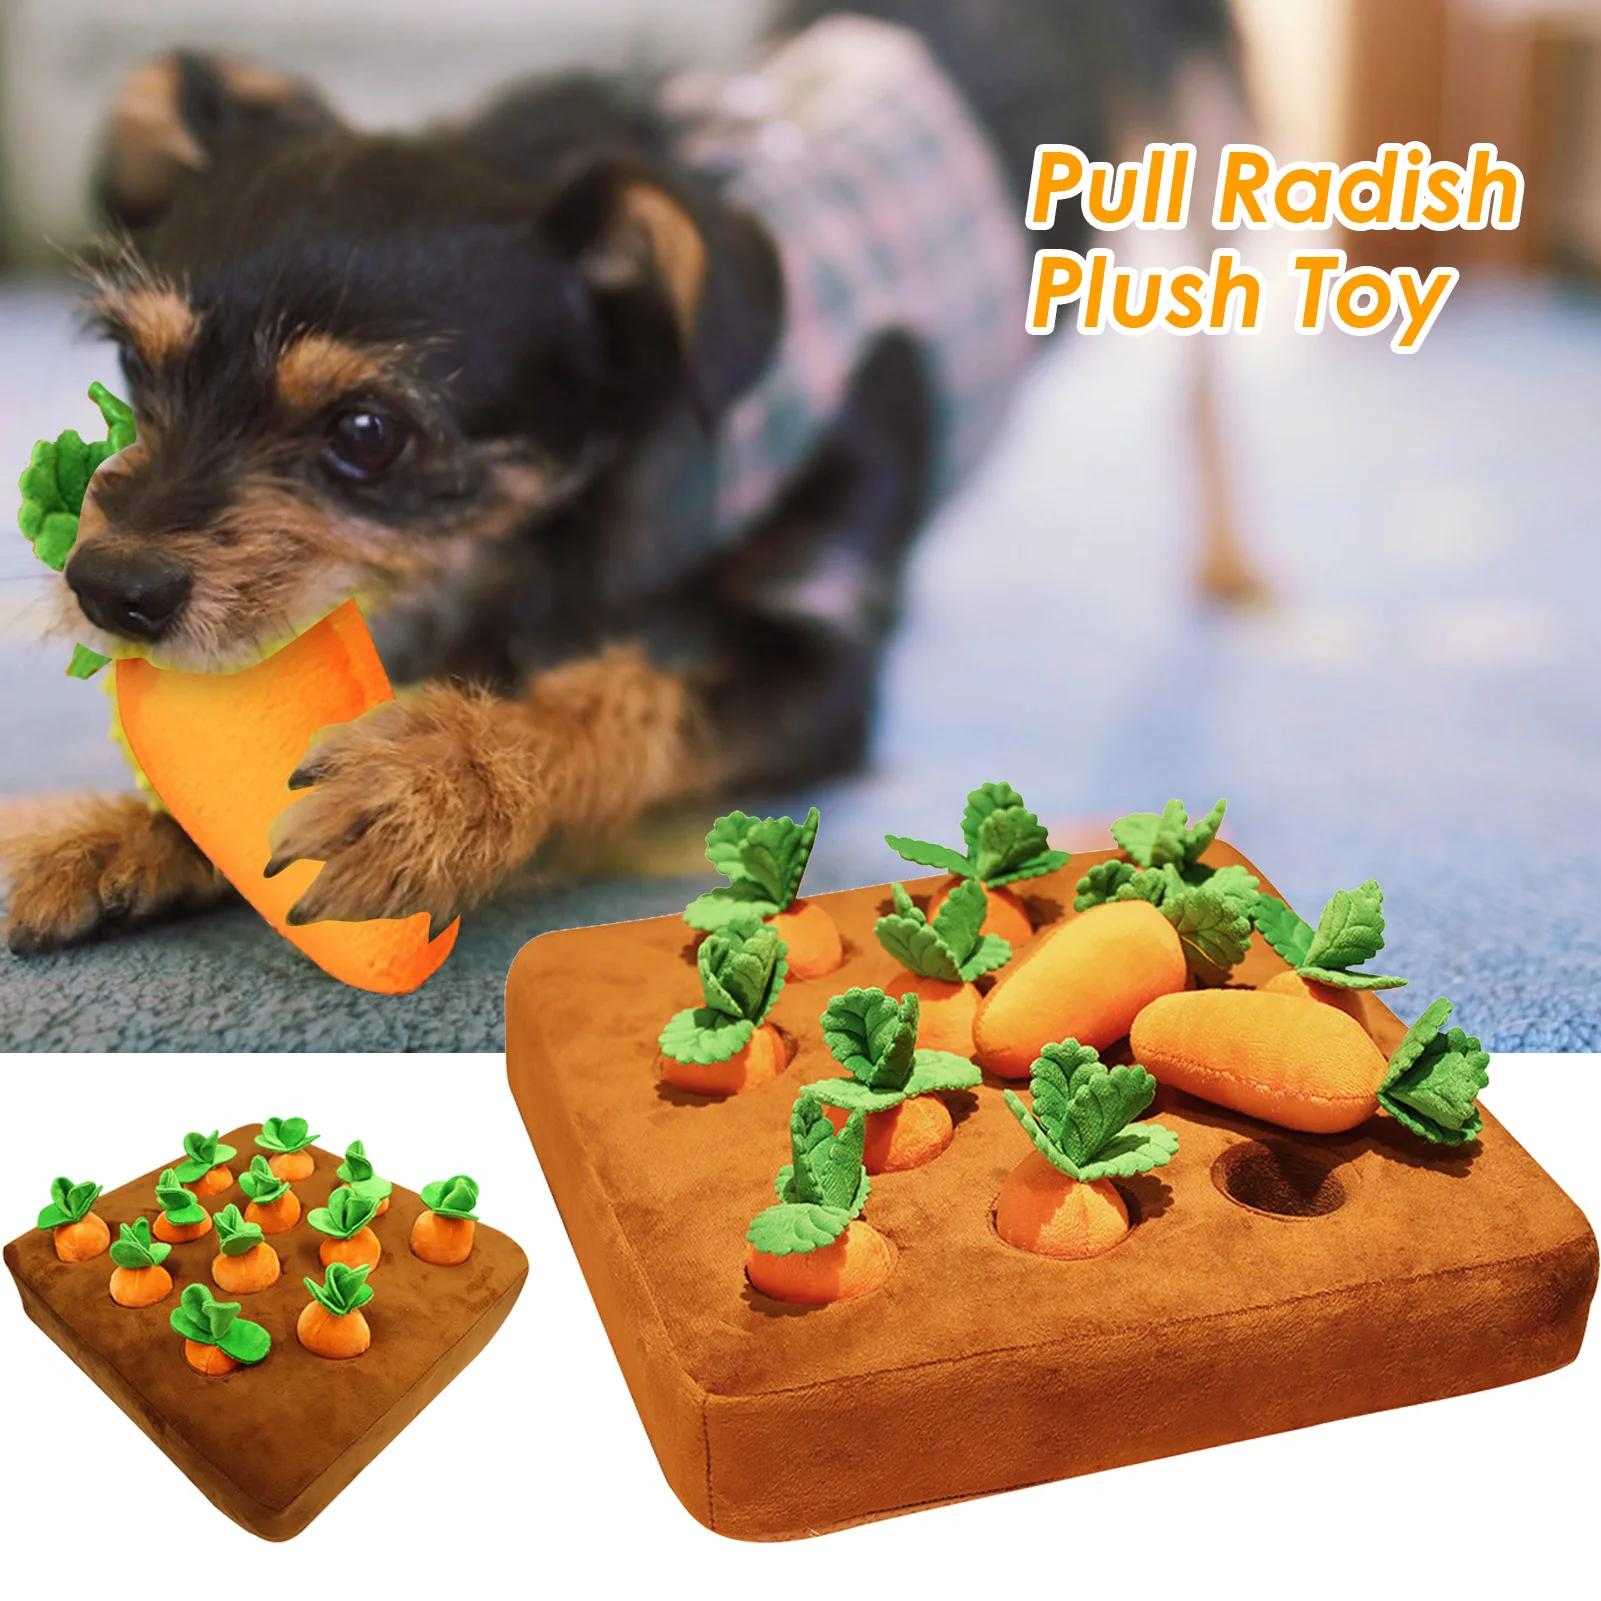 

Pet Dog Toys Carrot Plush Toy Vegetable Chew Toy For Dogs Snuffle Mat For Dogs Cats Durable Chew Puppy Toy Dogs Accessories